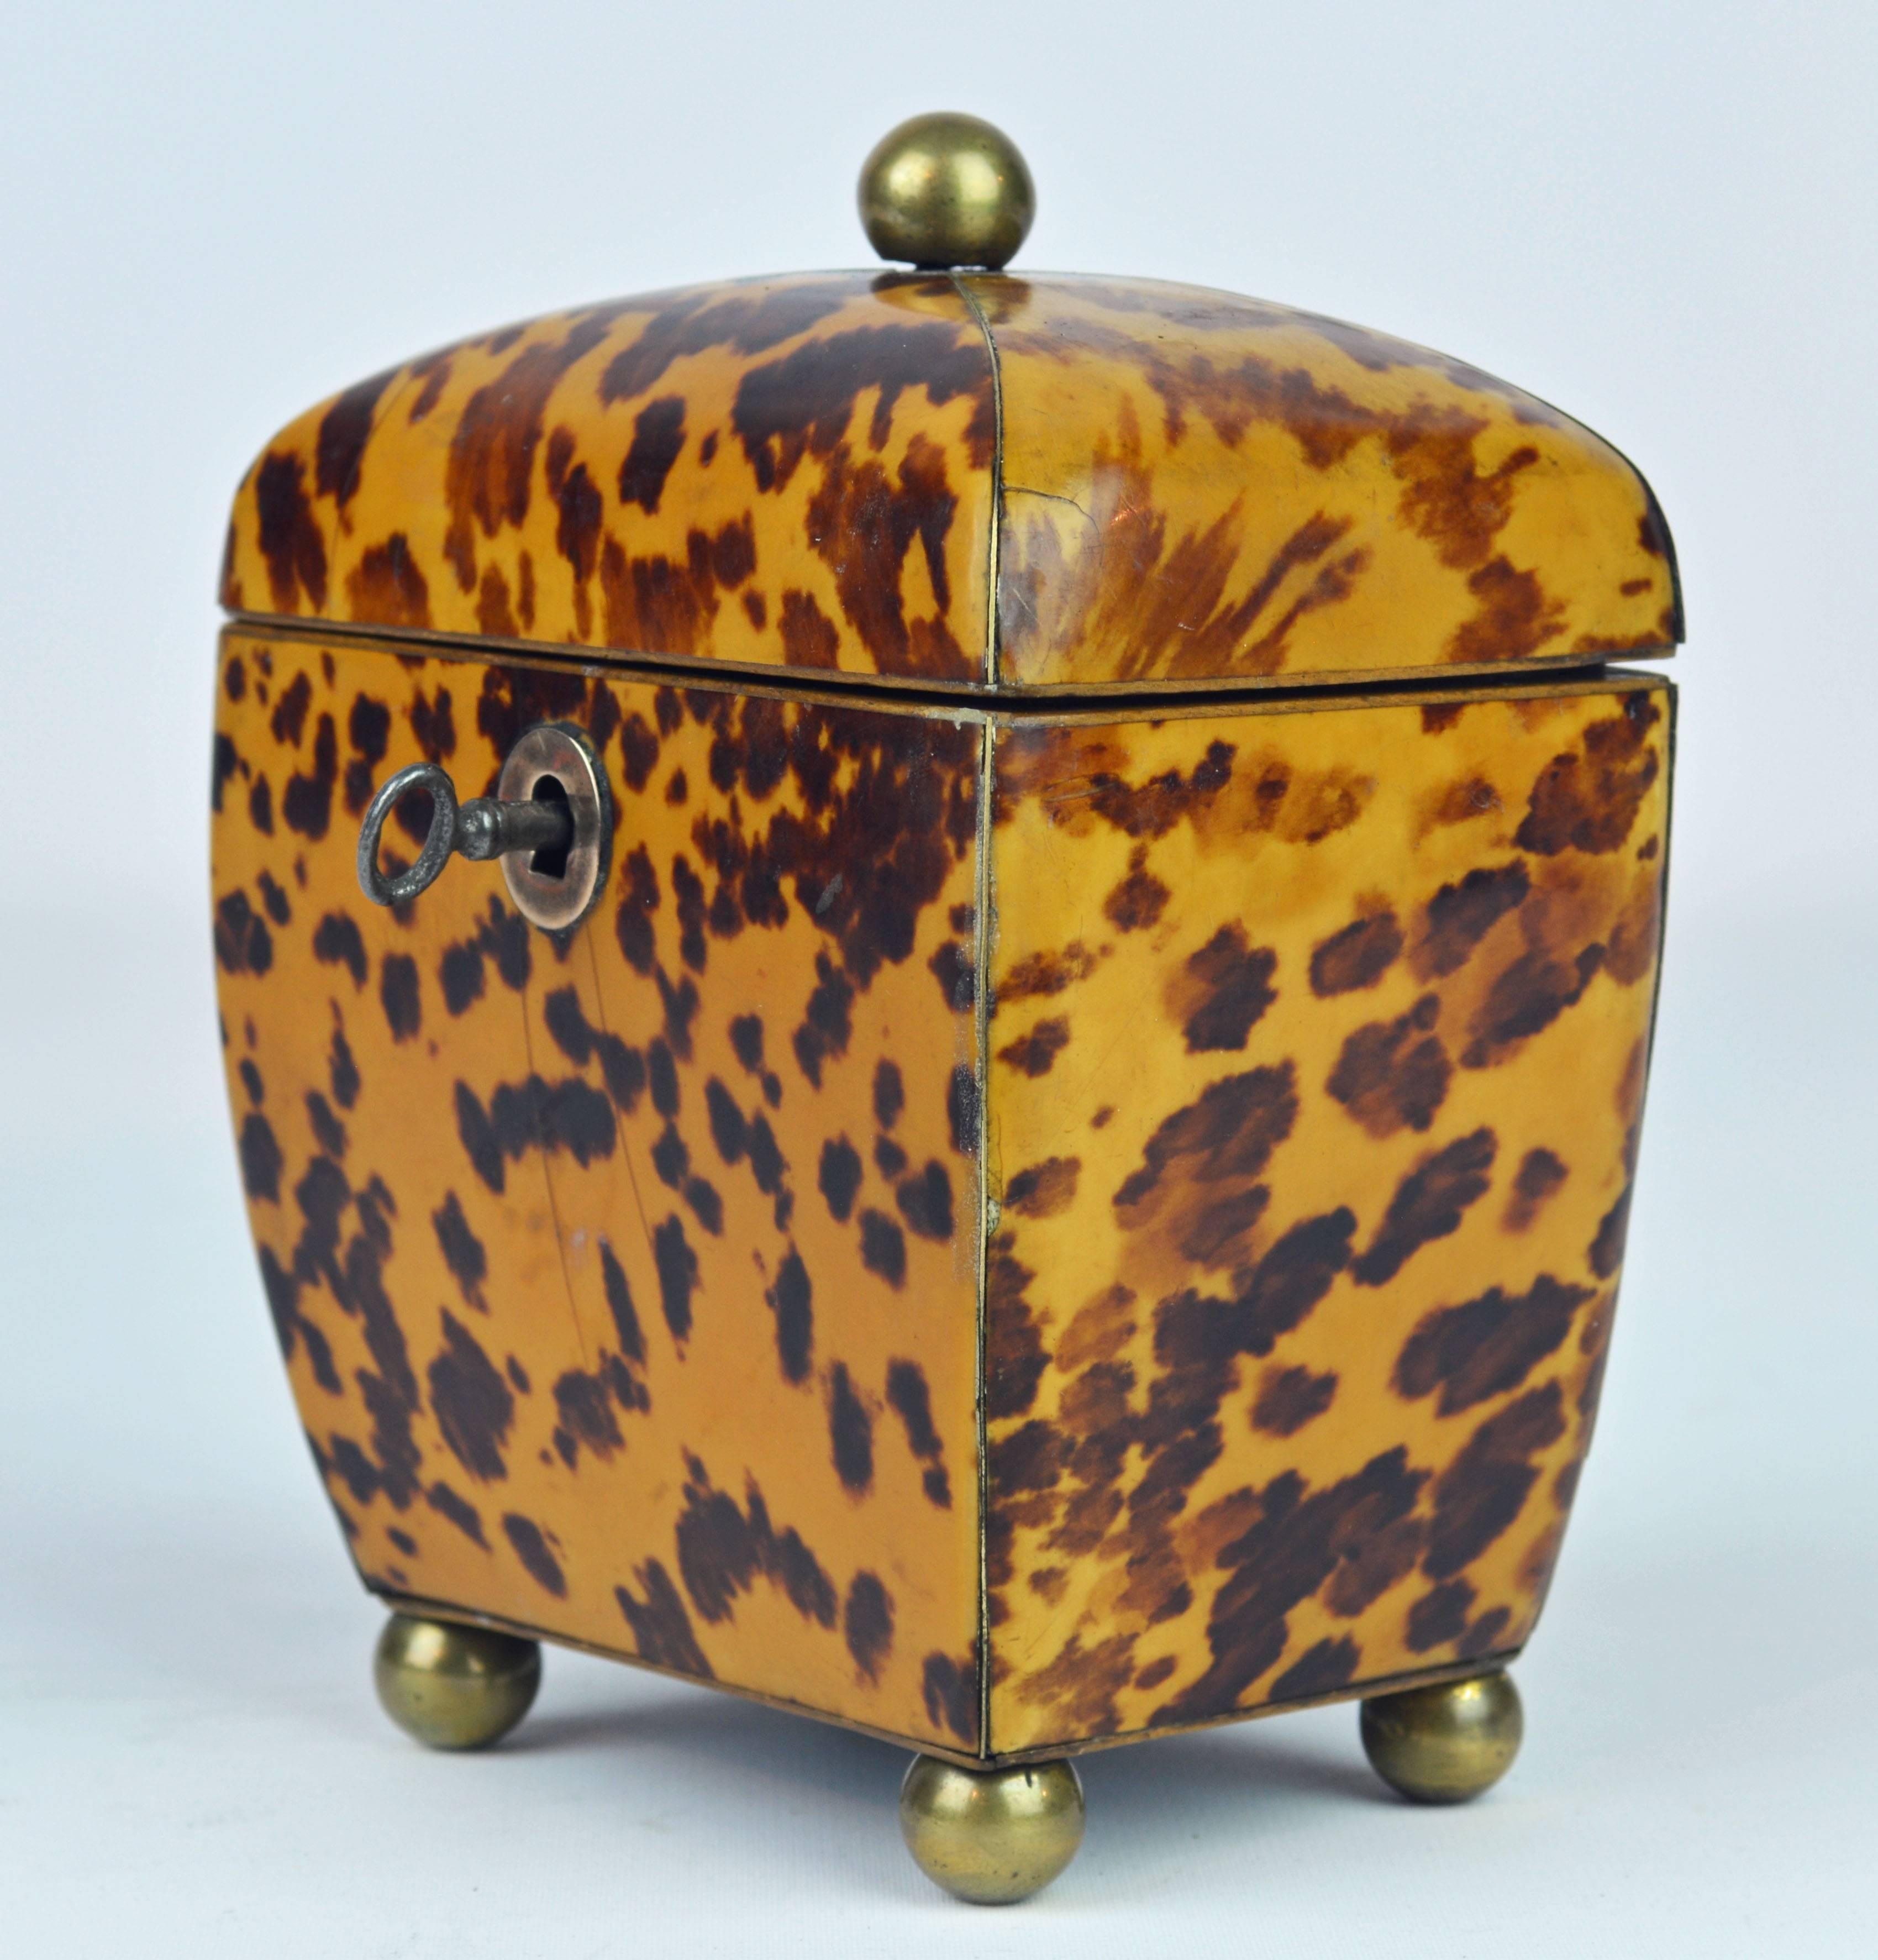 For connoisseurs this small tea caddy is a gem. All surfaces are clad with brass stringed tortoise shell and the domed body elegantly raised on brass ball feet complimented by the similar brass ball knob. The lid with functioning lock and key opens